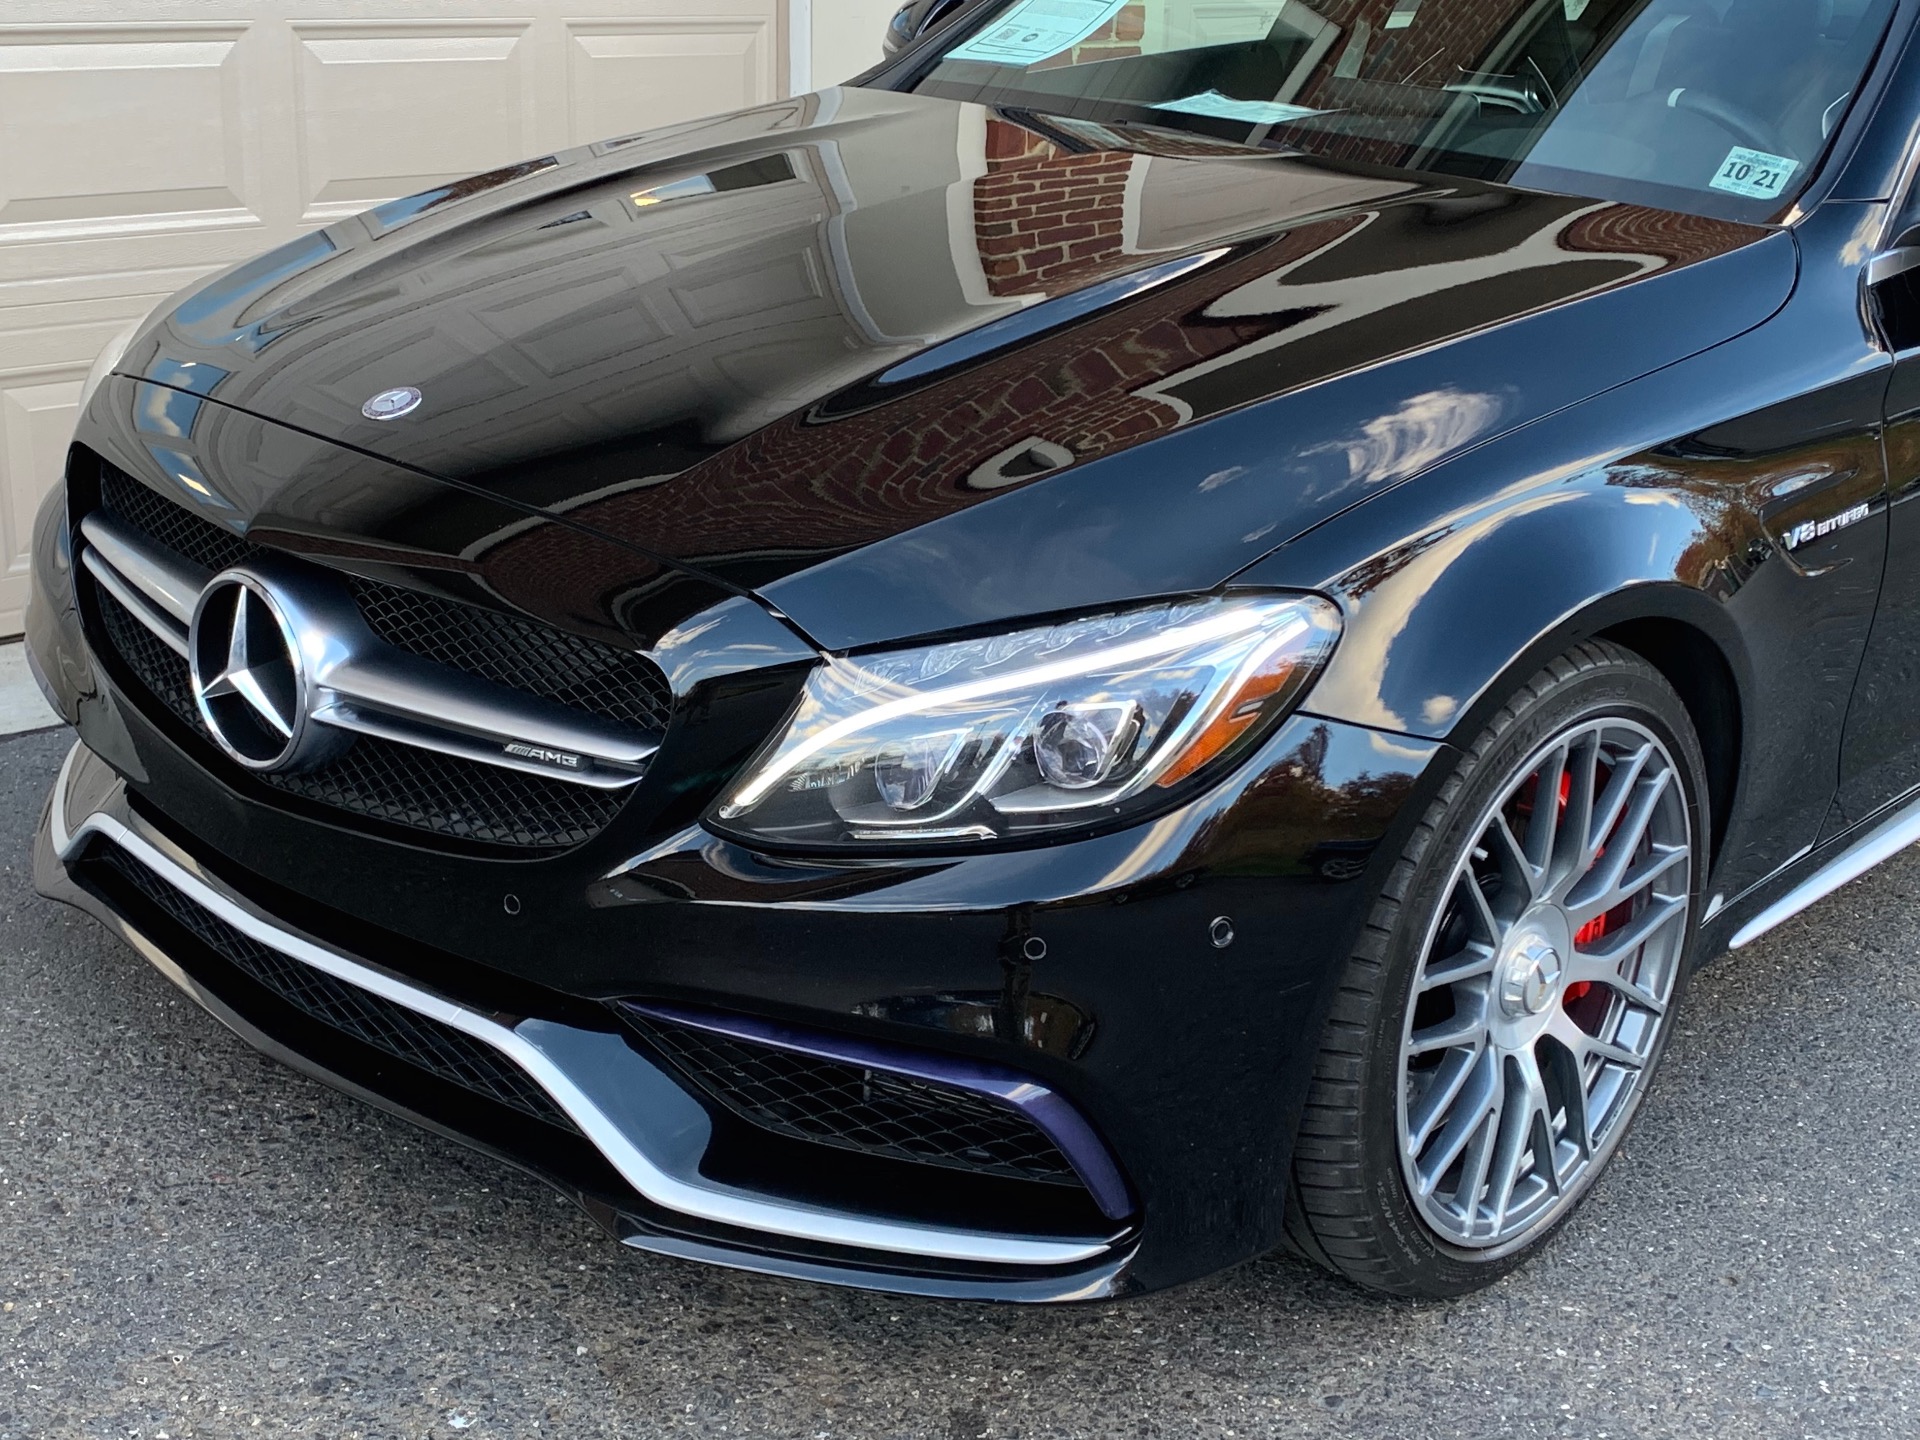 2016 Mercedes Benz C Class Amg C 63 S Stock 119415 For Sale Near